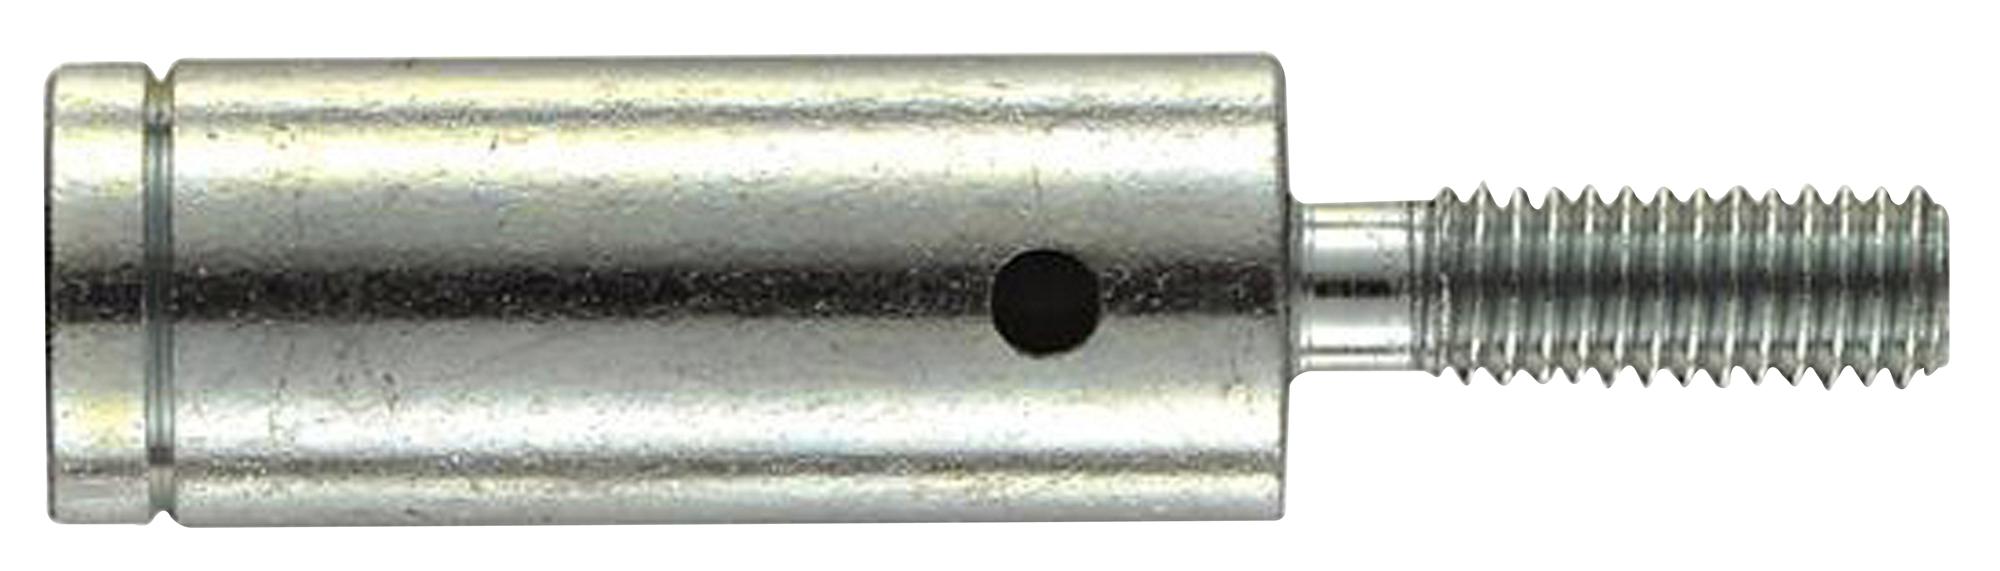 09330009809 GUIDE BUSHING, INDUSTRIAL CONNECTOR HARTING